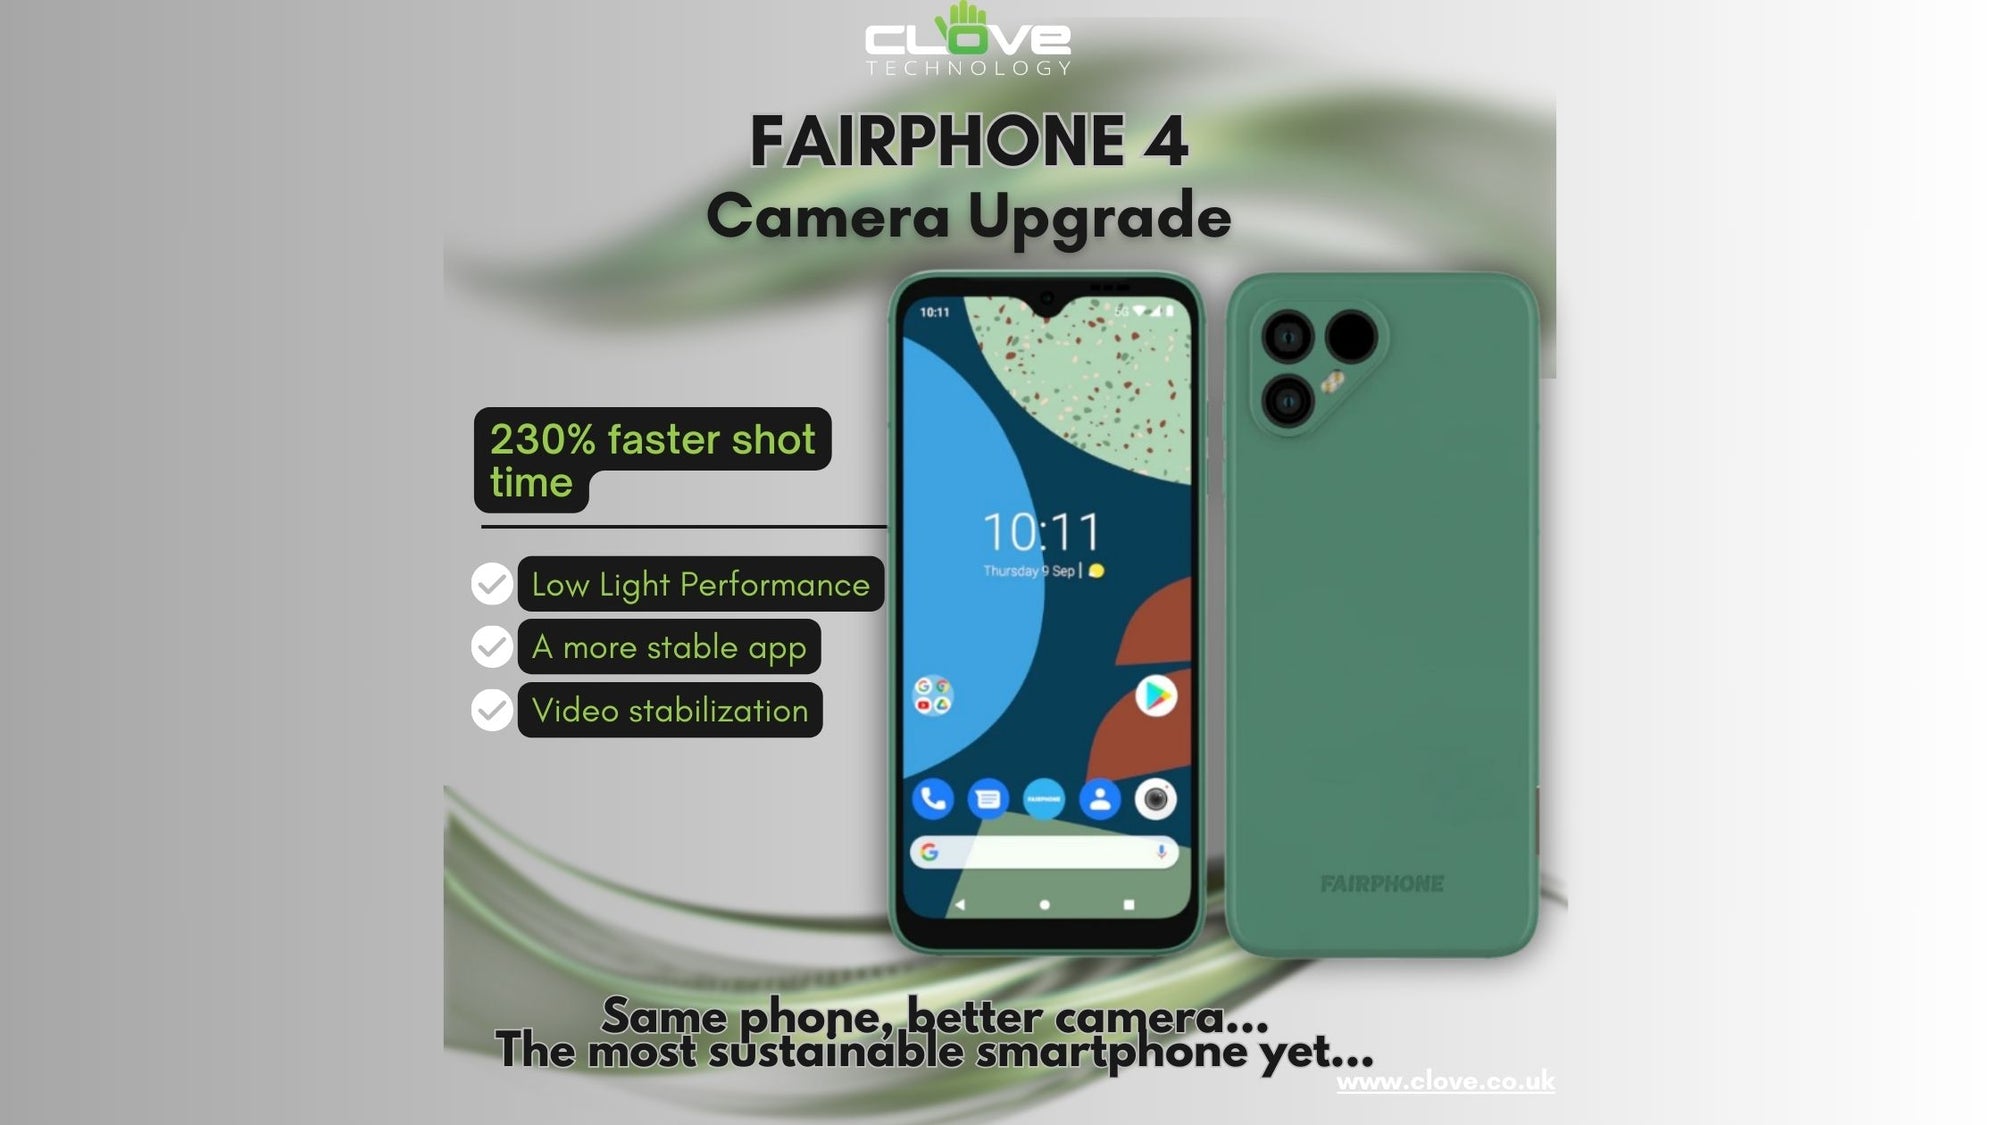 Fairphone 4 Camera Upgrade, a Brand-New Camera for Your Old Phone